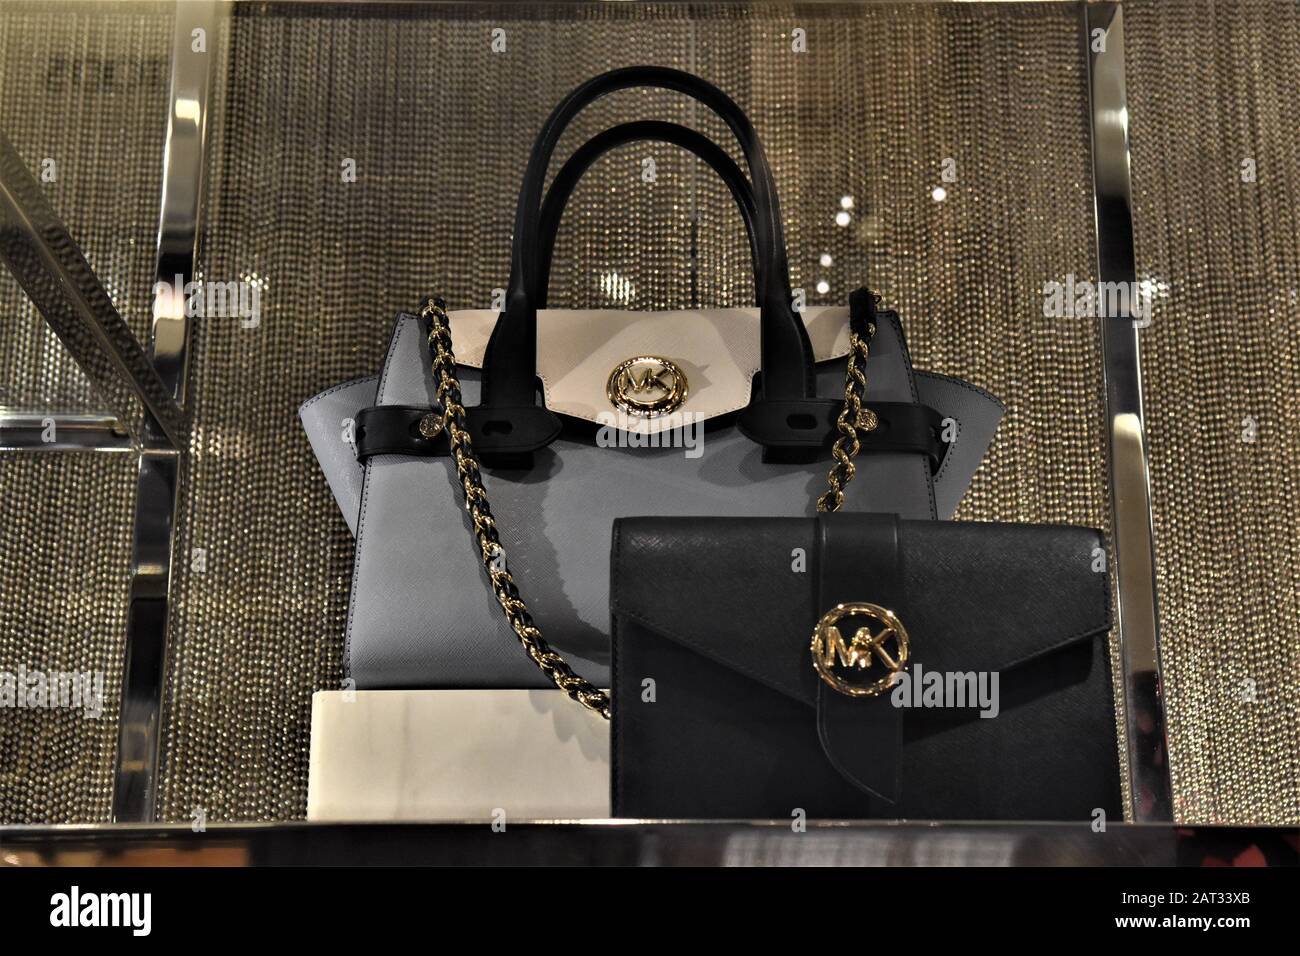 BAGS ON DISPLAY AT MICHAEL KORS BOUTIQUE IN CONDOTTI STREET,THE CENTER OF  FASHION SHOPPING IN ROME Stock Photo - Alamy